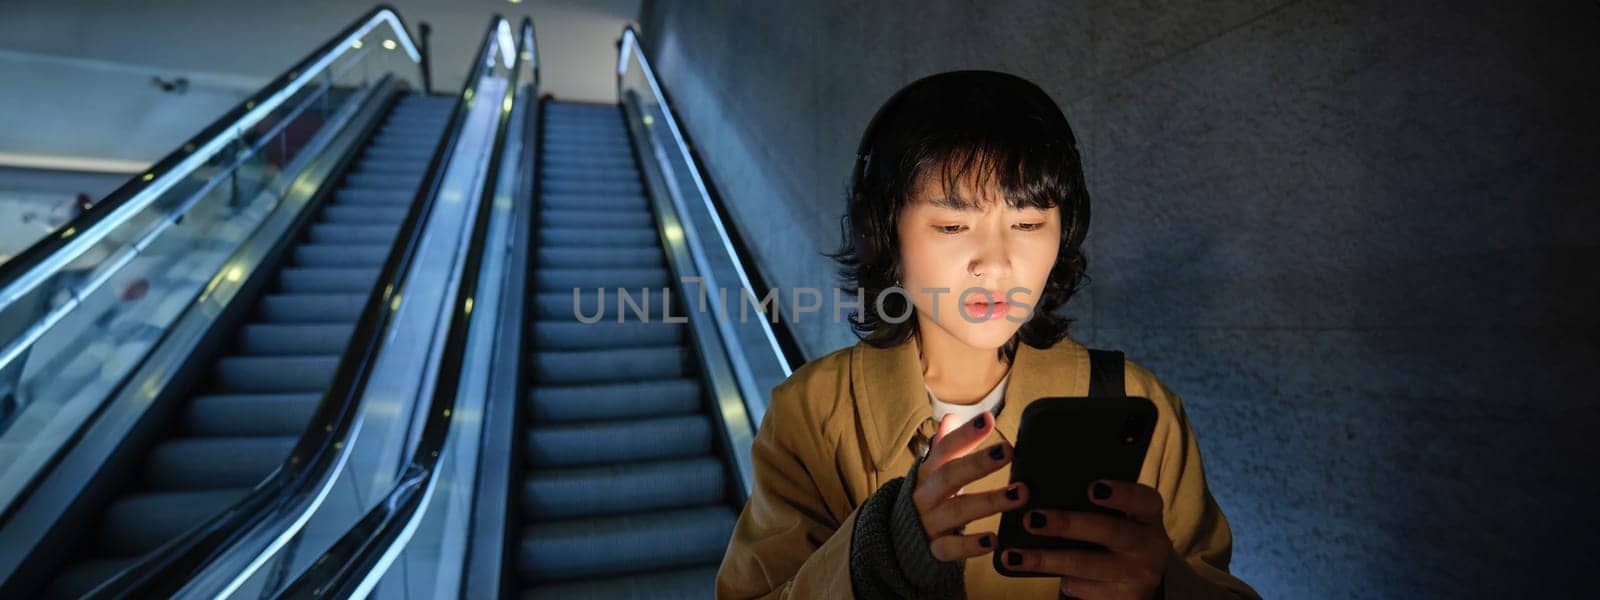 Urban lifestyle and people. Woman in headphones, looks serious at her smartphone app, checking map, public transport schedule with worried face, standing on escalator.